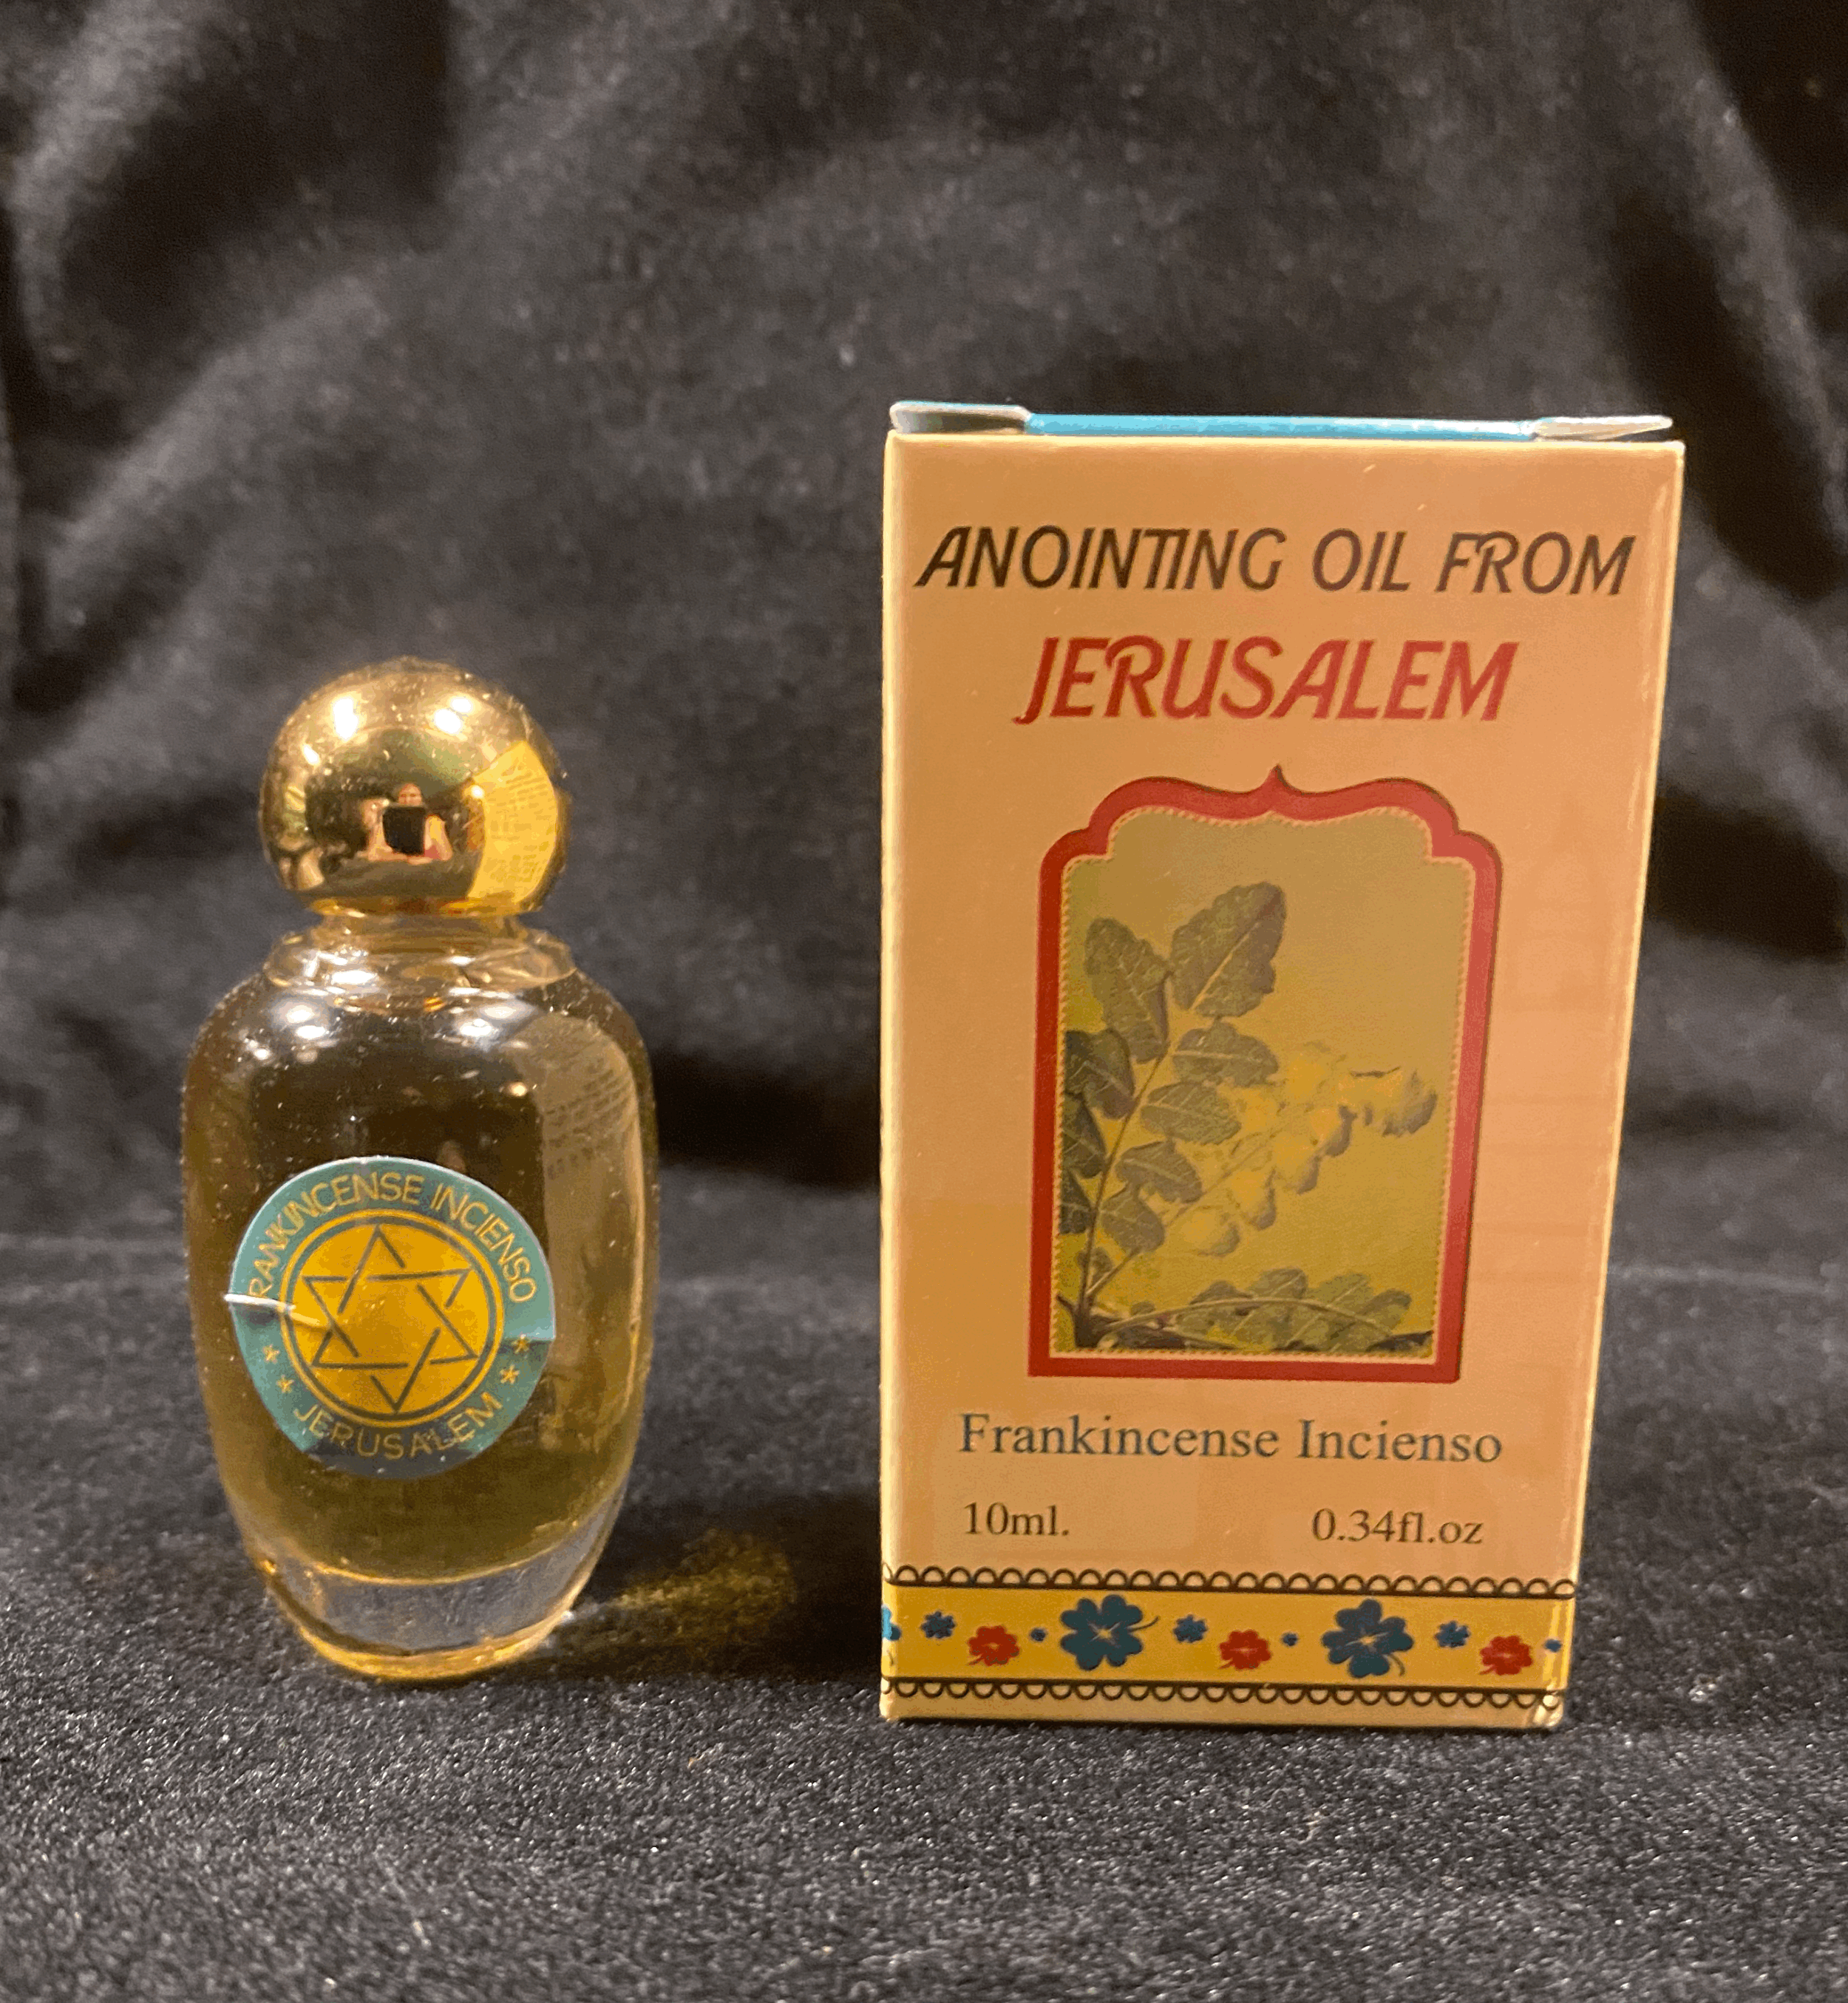 Anointing Oil 'Frankincense and Myrrh' Made in Jerusalem - 10 ml